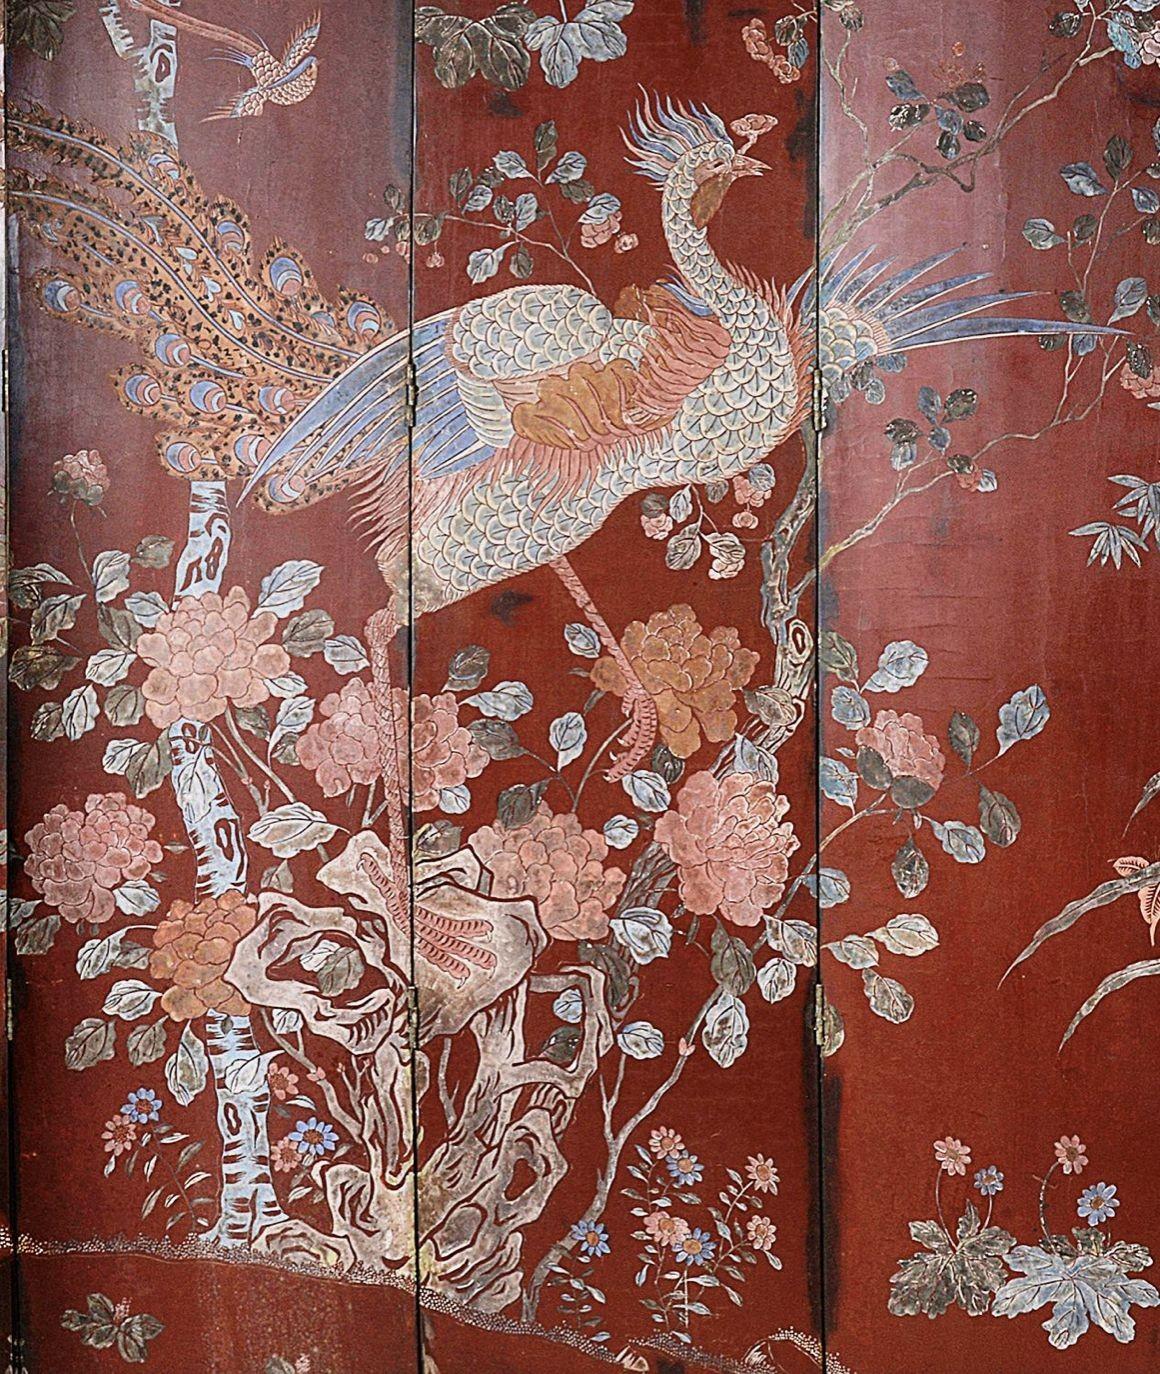 Hand-Painted Early 19th Century Chinese Coromandel Lacquer Screen For Sale